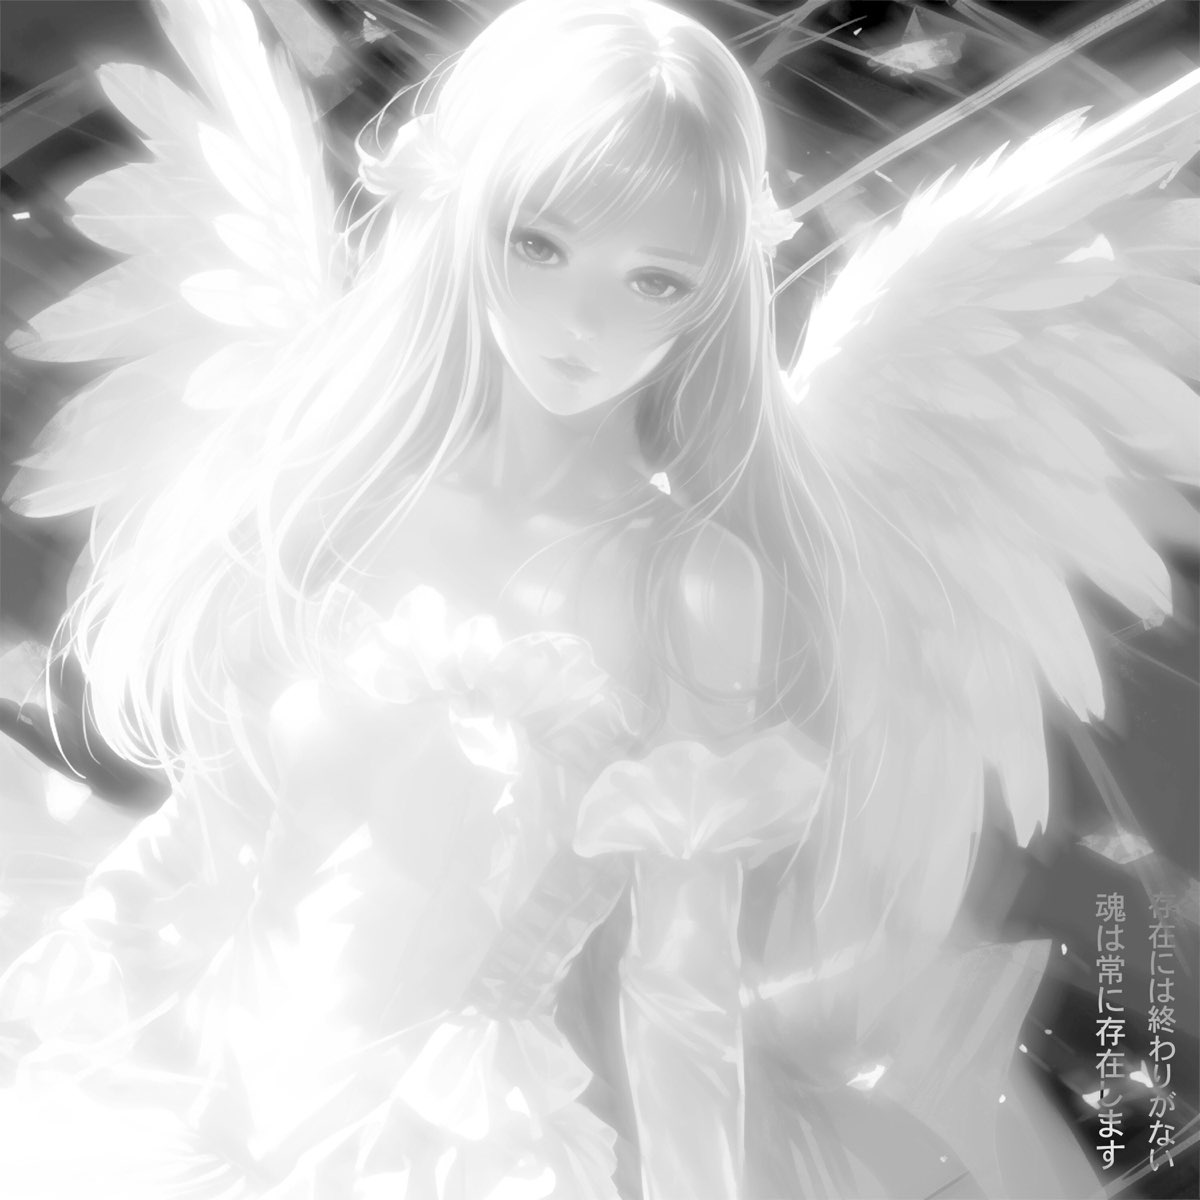 02 & #01 - Lonely, Cruel & Gorgeous Angel!! #Voila! The Anime Rate